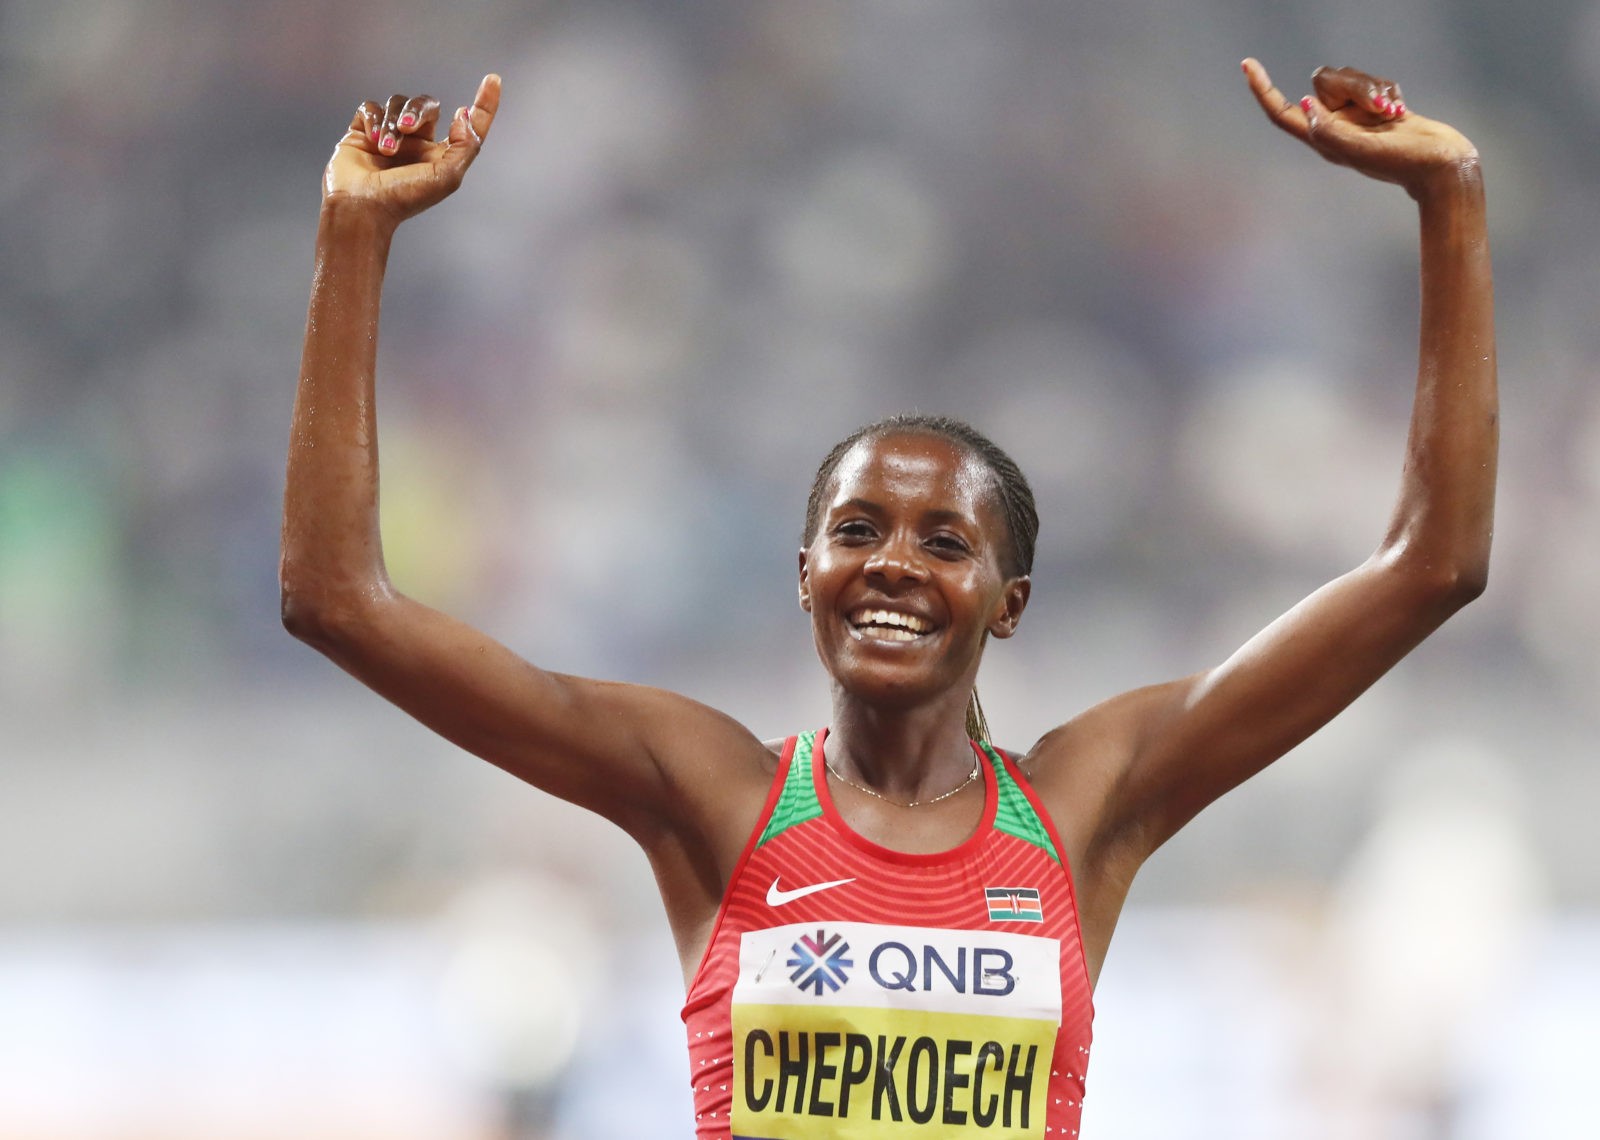 Beatrice Chepkoech of Kenya celebrates winning gold in the Women's 3000 metres Steeplechase final during day four of 17th IAAF World Athletics Championships Doha 2019 at Khalifa International Stadium on September 30, 2019 in Doha, Qatar. (Photo by Alexander Hassenstein/Getty Images for IAAF)